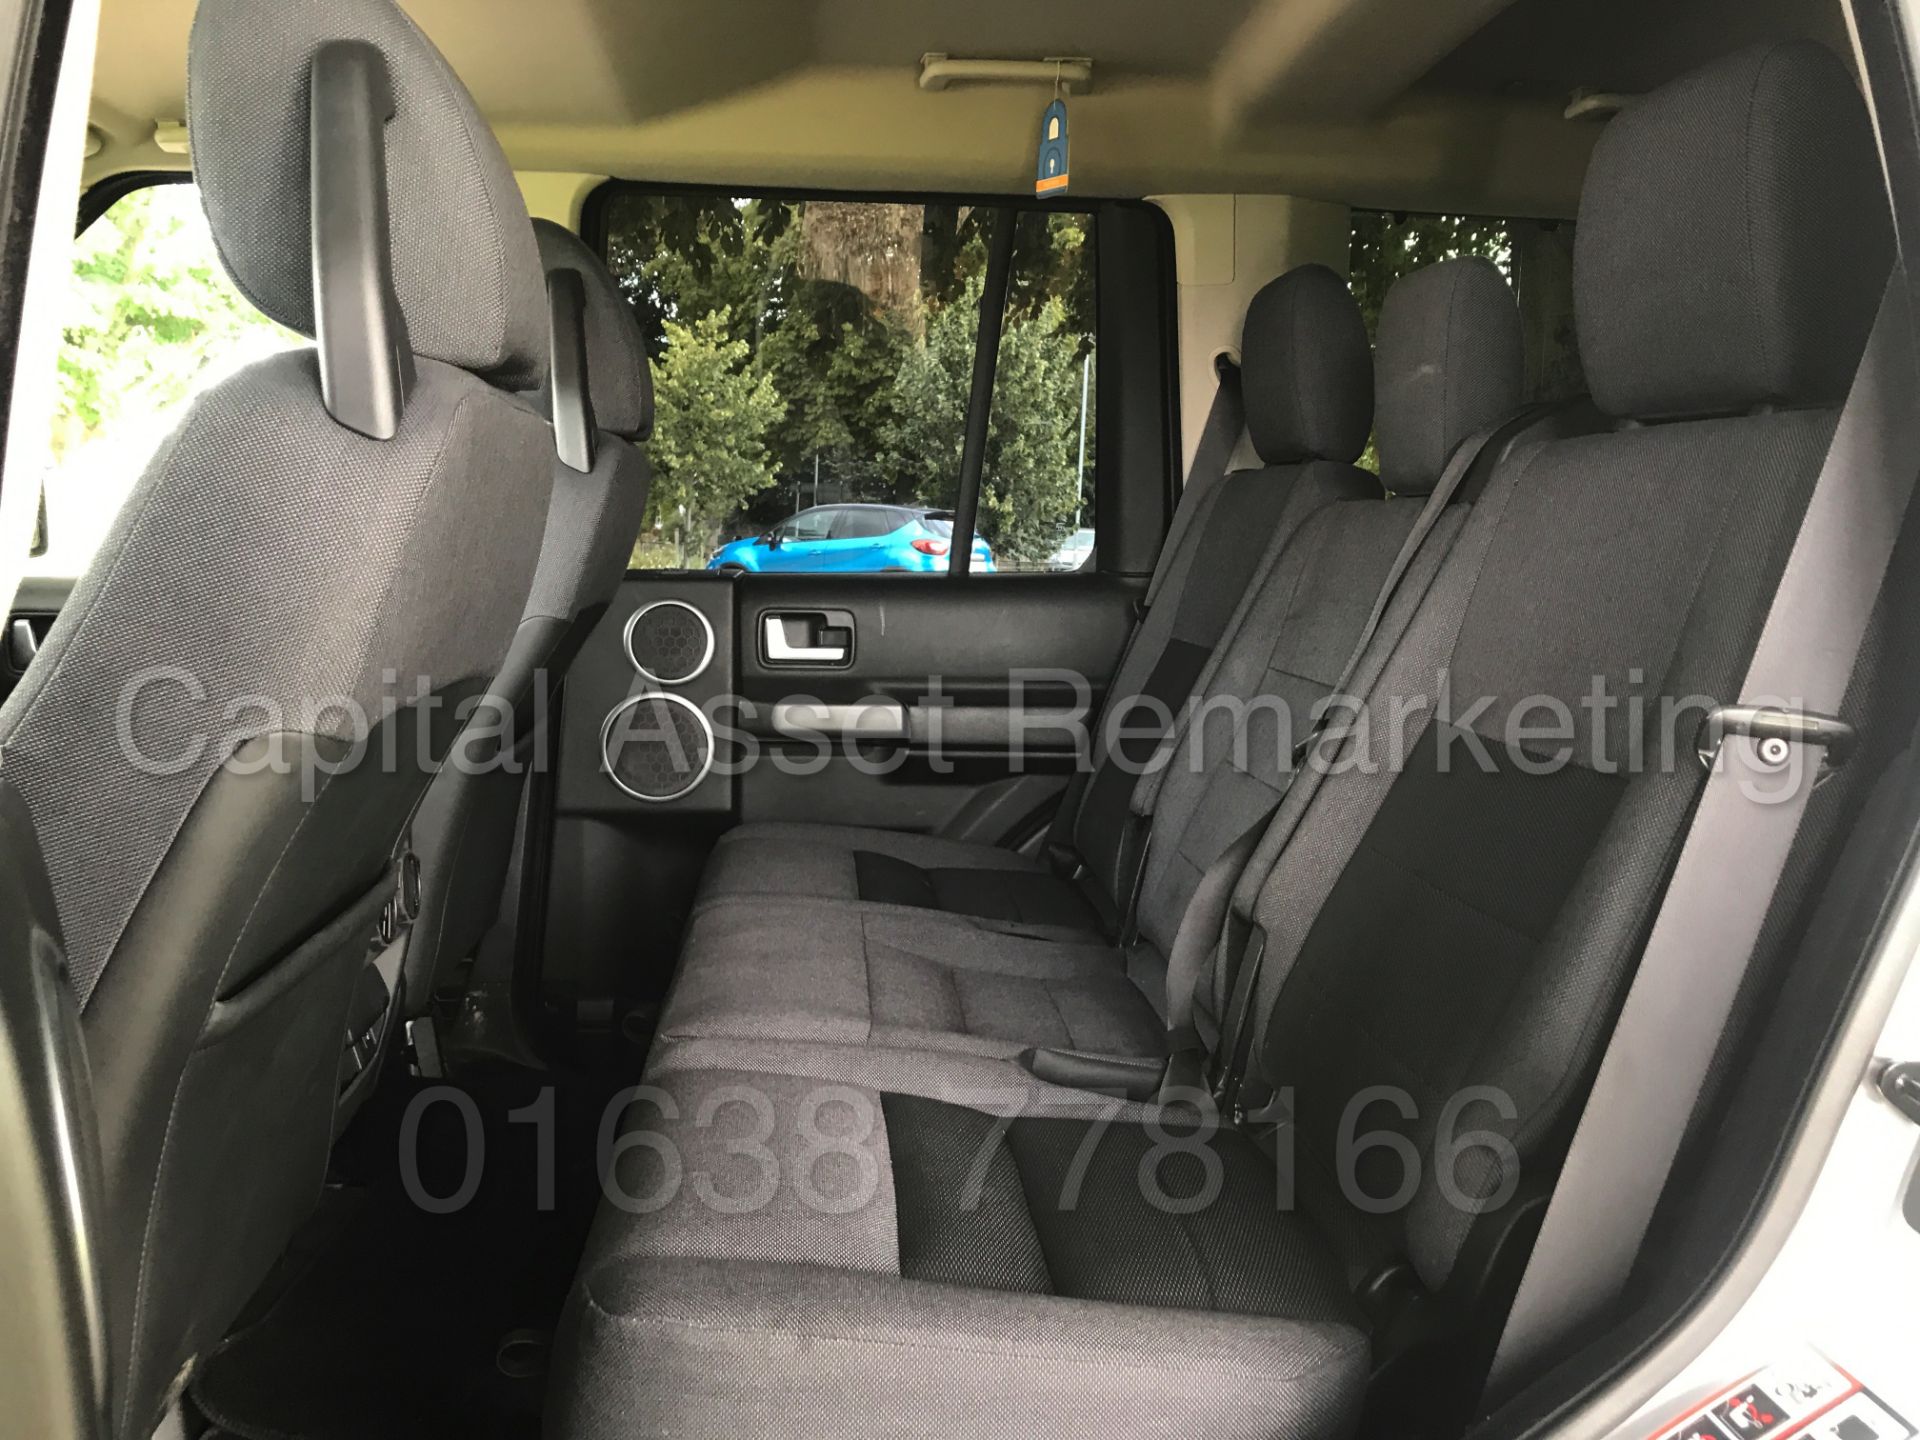 (On Sale) LAND ROVER DISCOVERY 3 (2005 - FACELIFT MODEL) 'TDV6 - AUTO - 7 SEATER - SAT NAV' (NO VAT) - Image 16 of 36